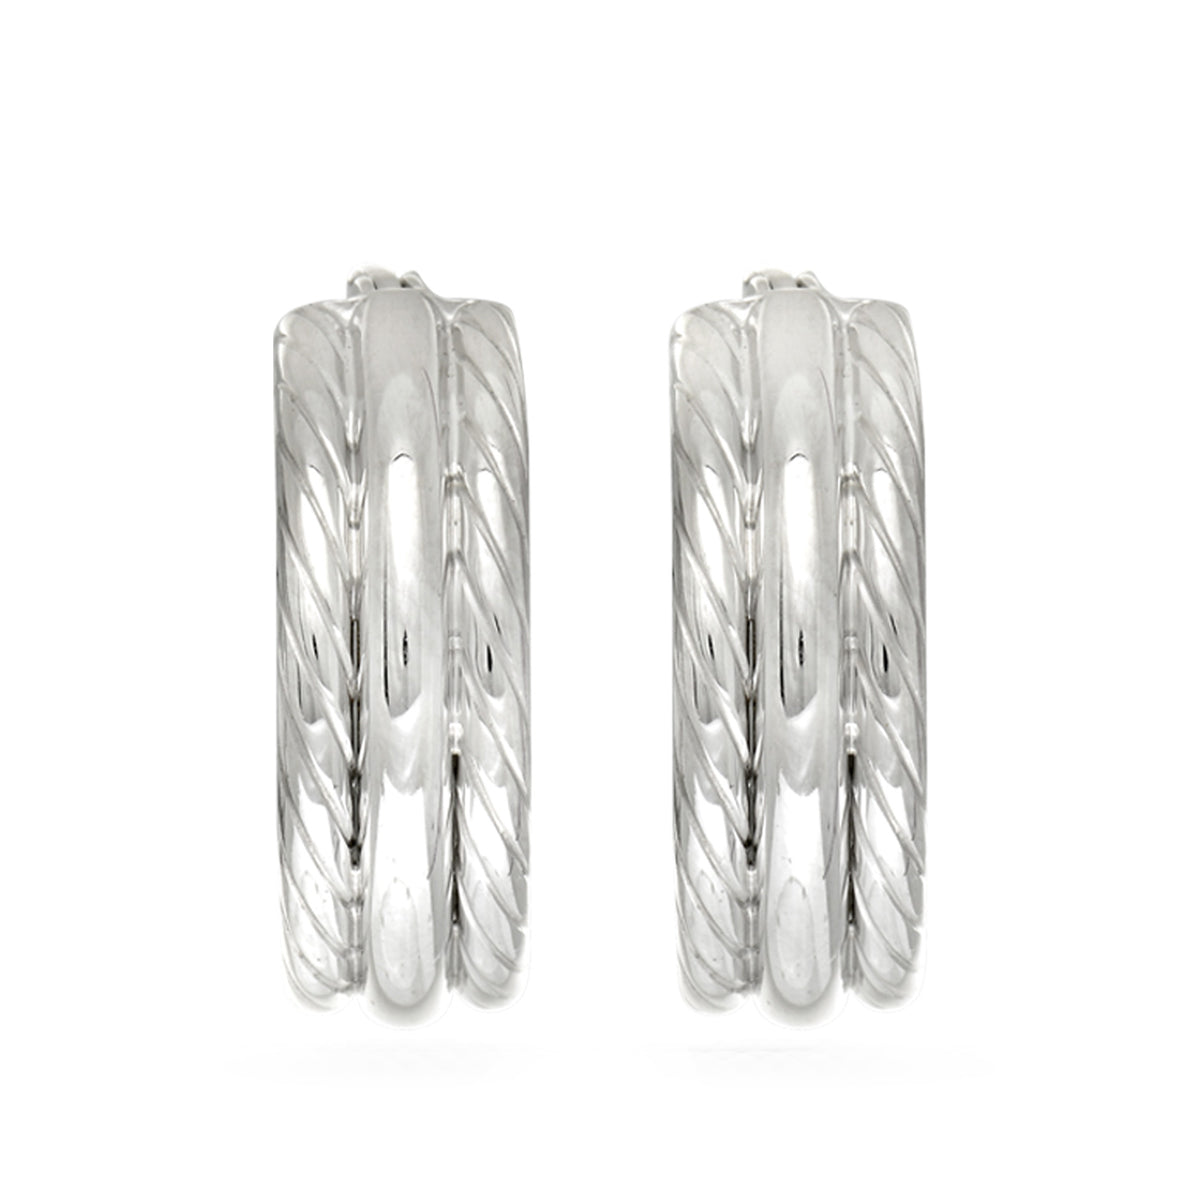 Sterling Silver Rhodium Plated Twisted Tube Round Hoop Earrings, Diameter 15mm fine designer jewelry for men and women